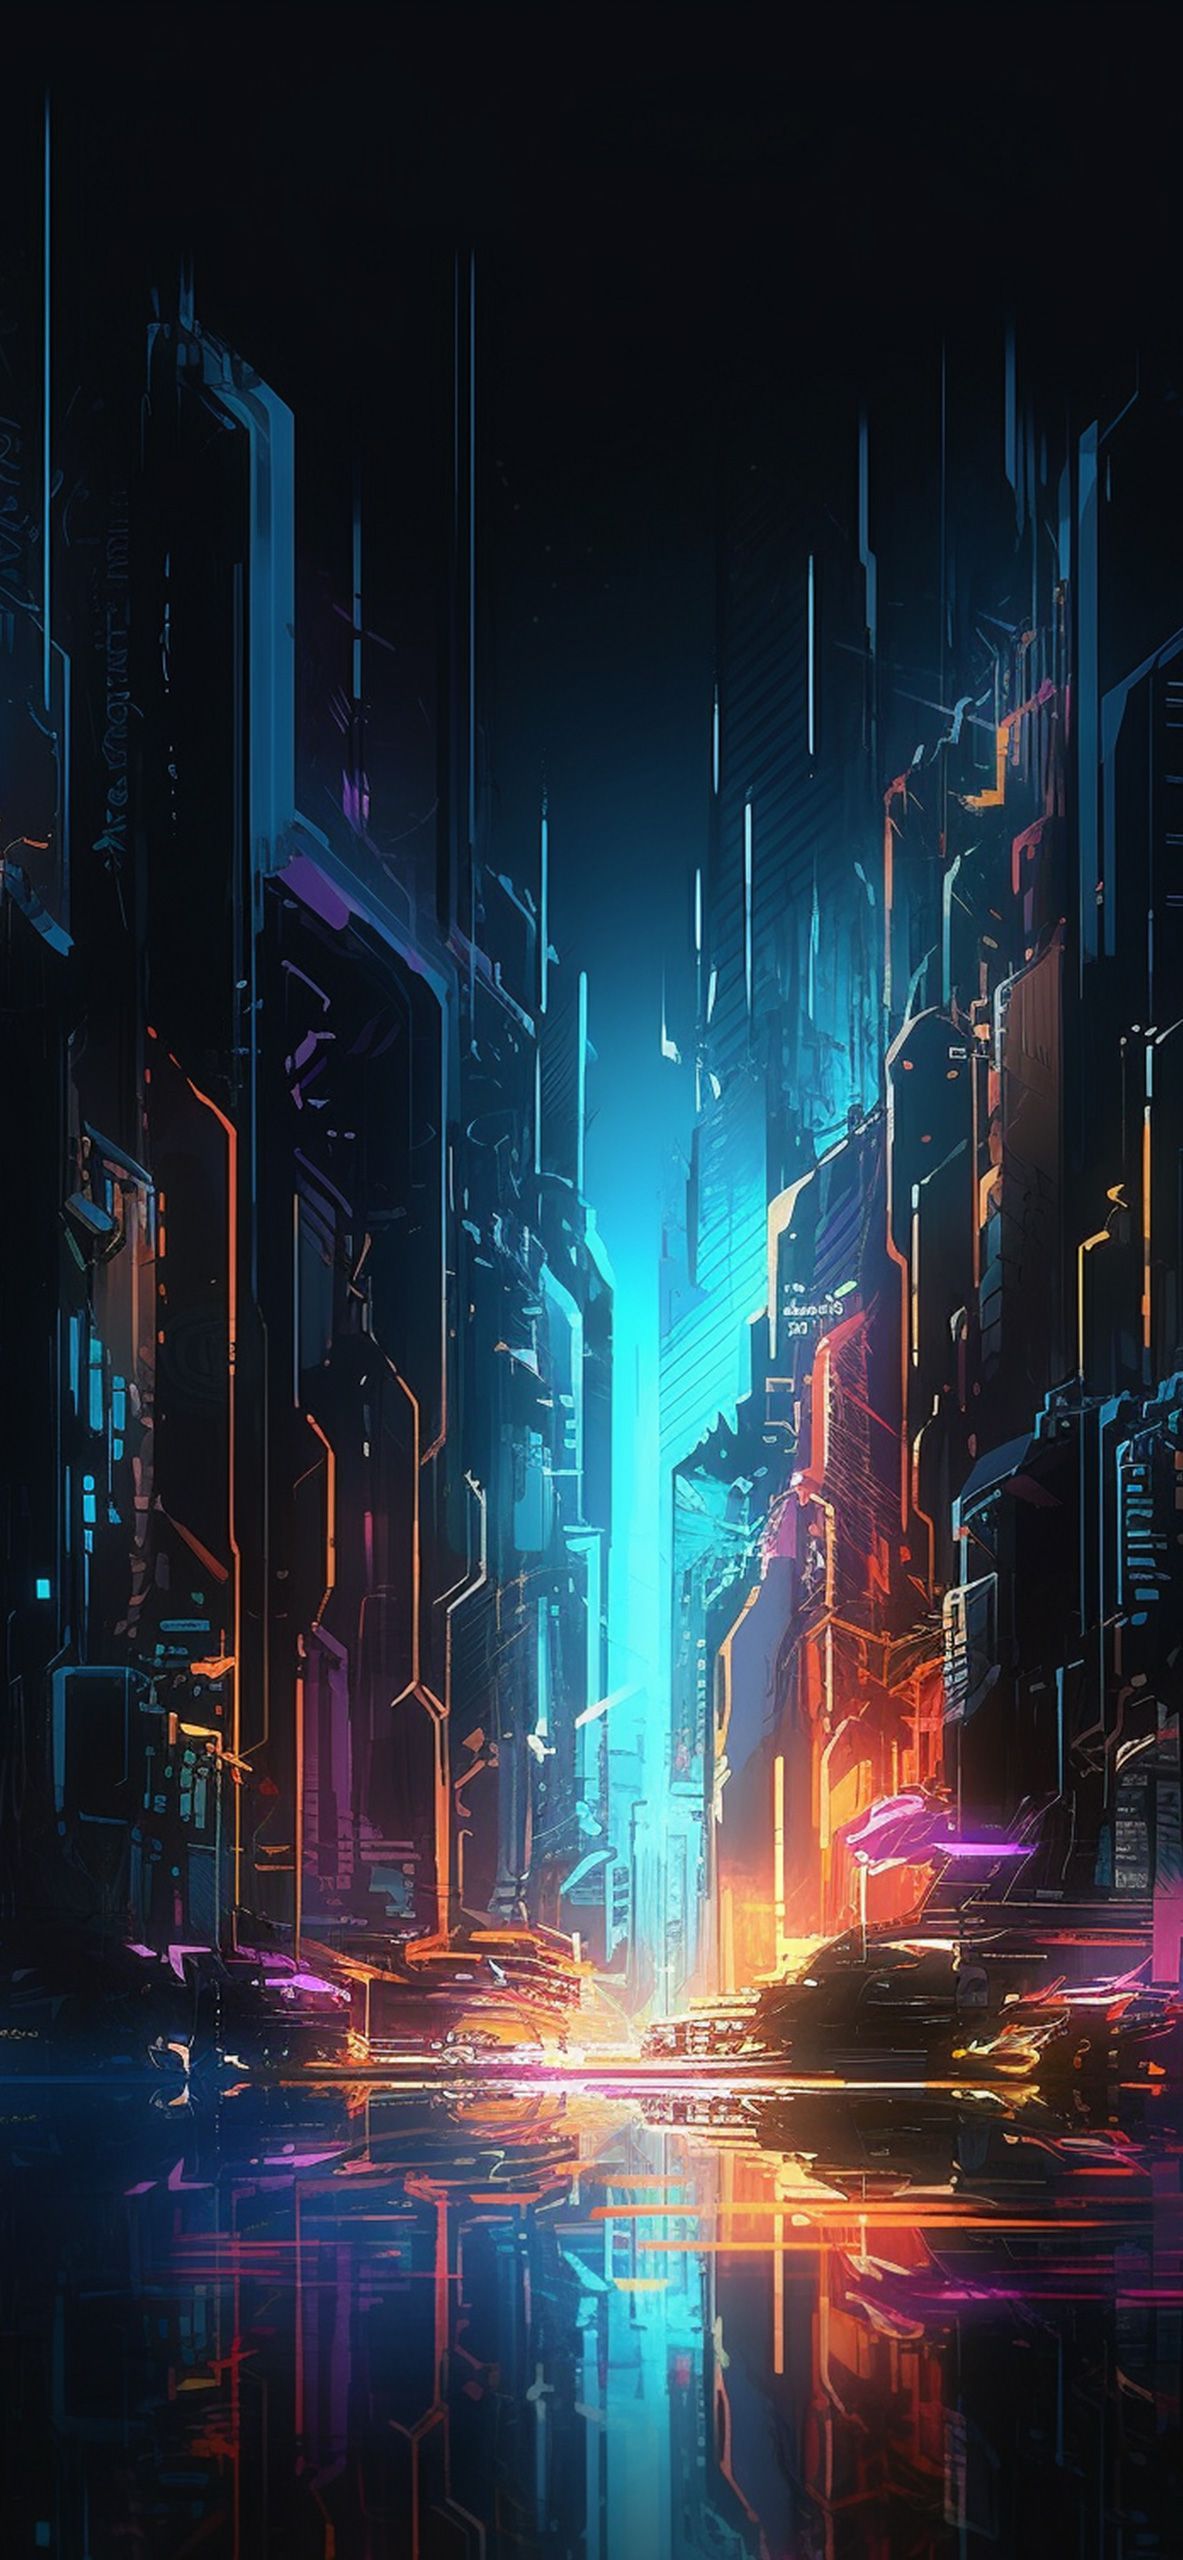 Cyberpunk 2077 wallpaper for iPhone and Android phone. Get the best Cyberpunk 2077 wallpaper for your phone. - Cyberpunk